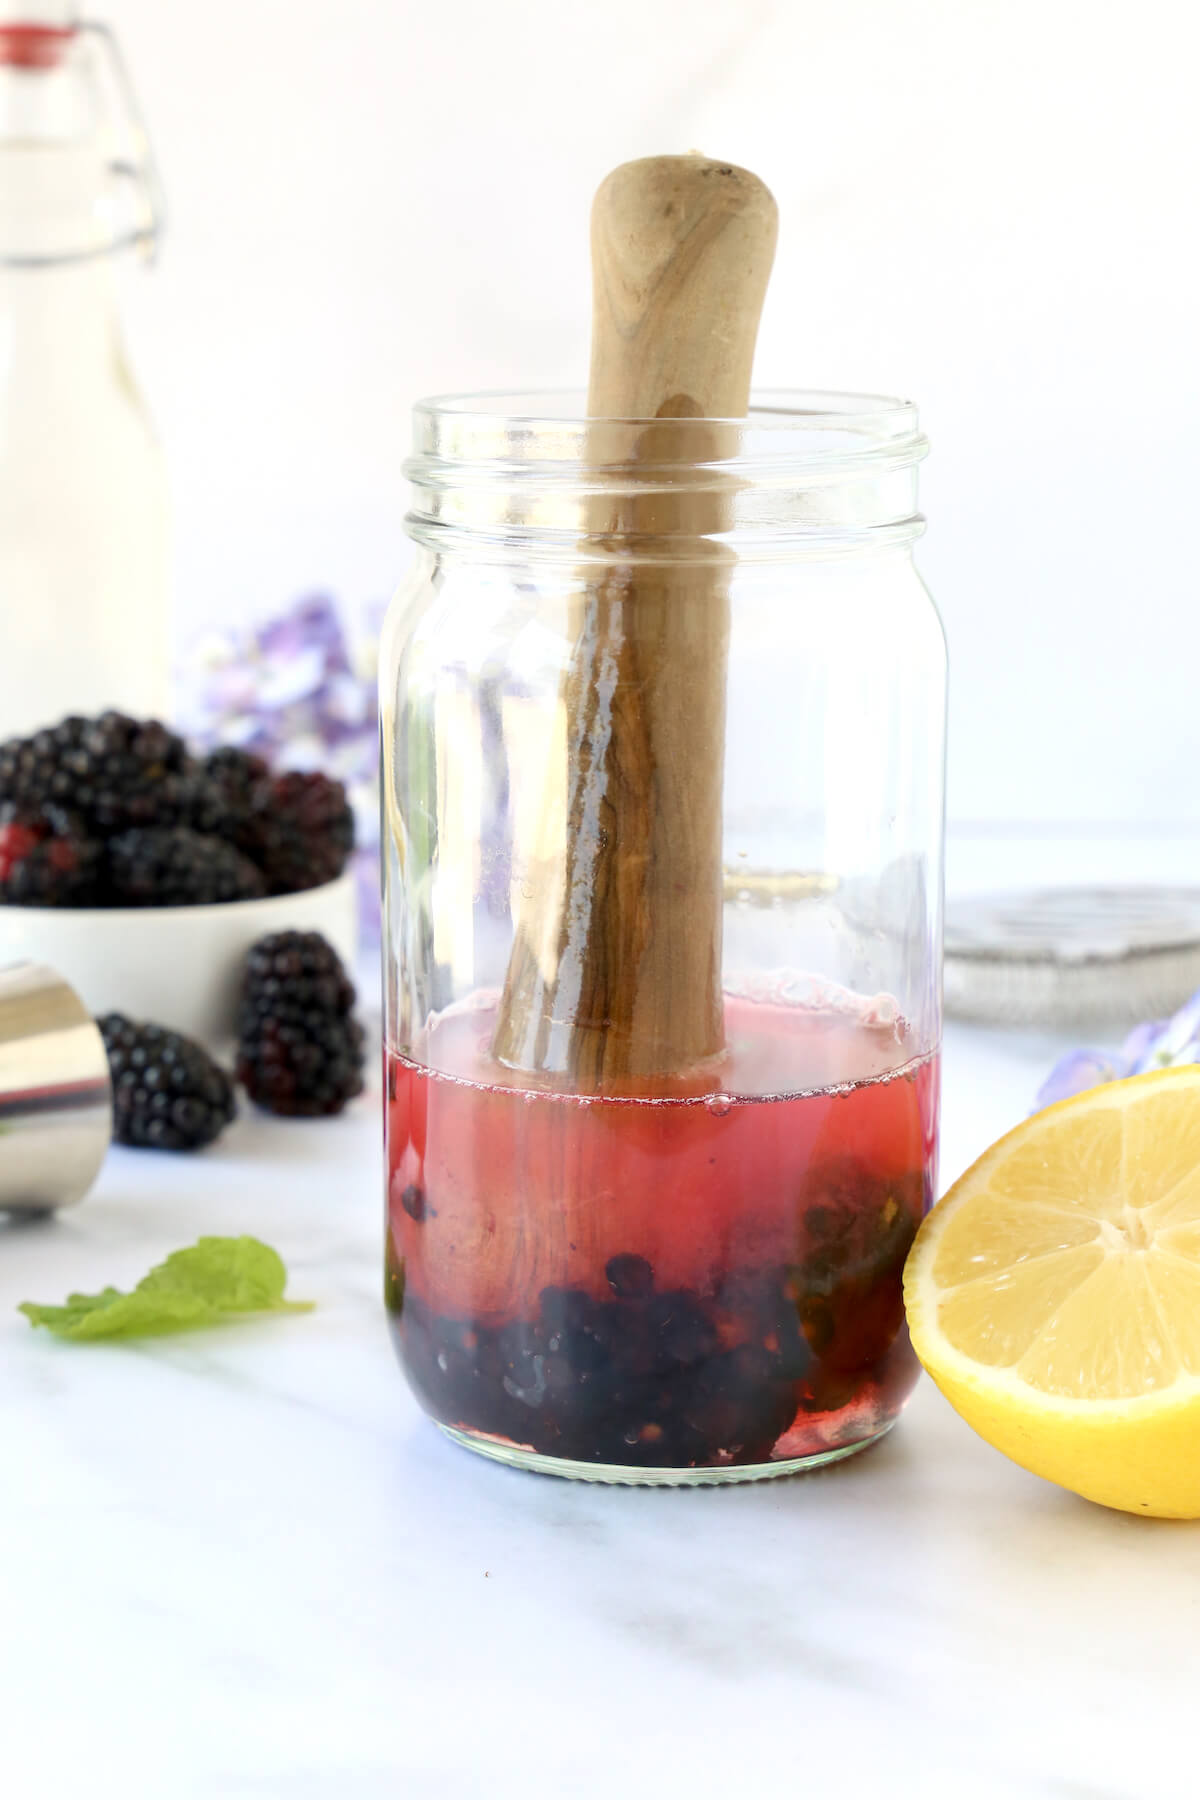 A glass jar filled with blackberries, mint leaves, tequila, lemon juice and simple syrup getting mashed.  